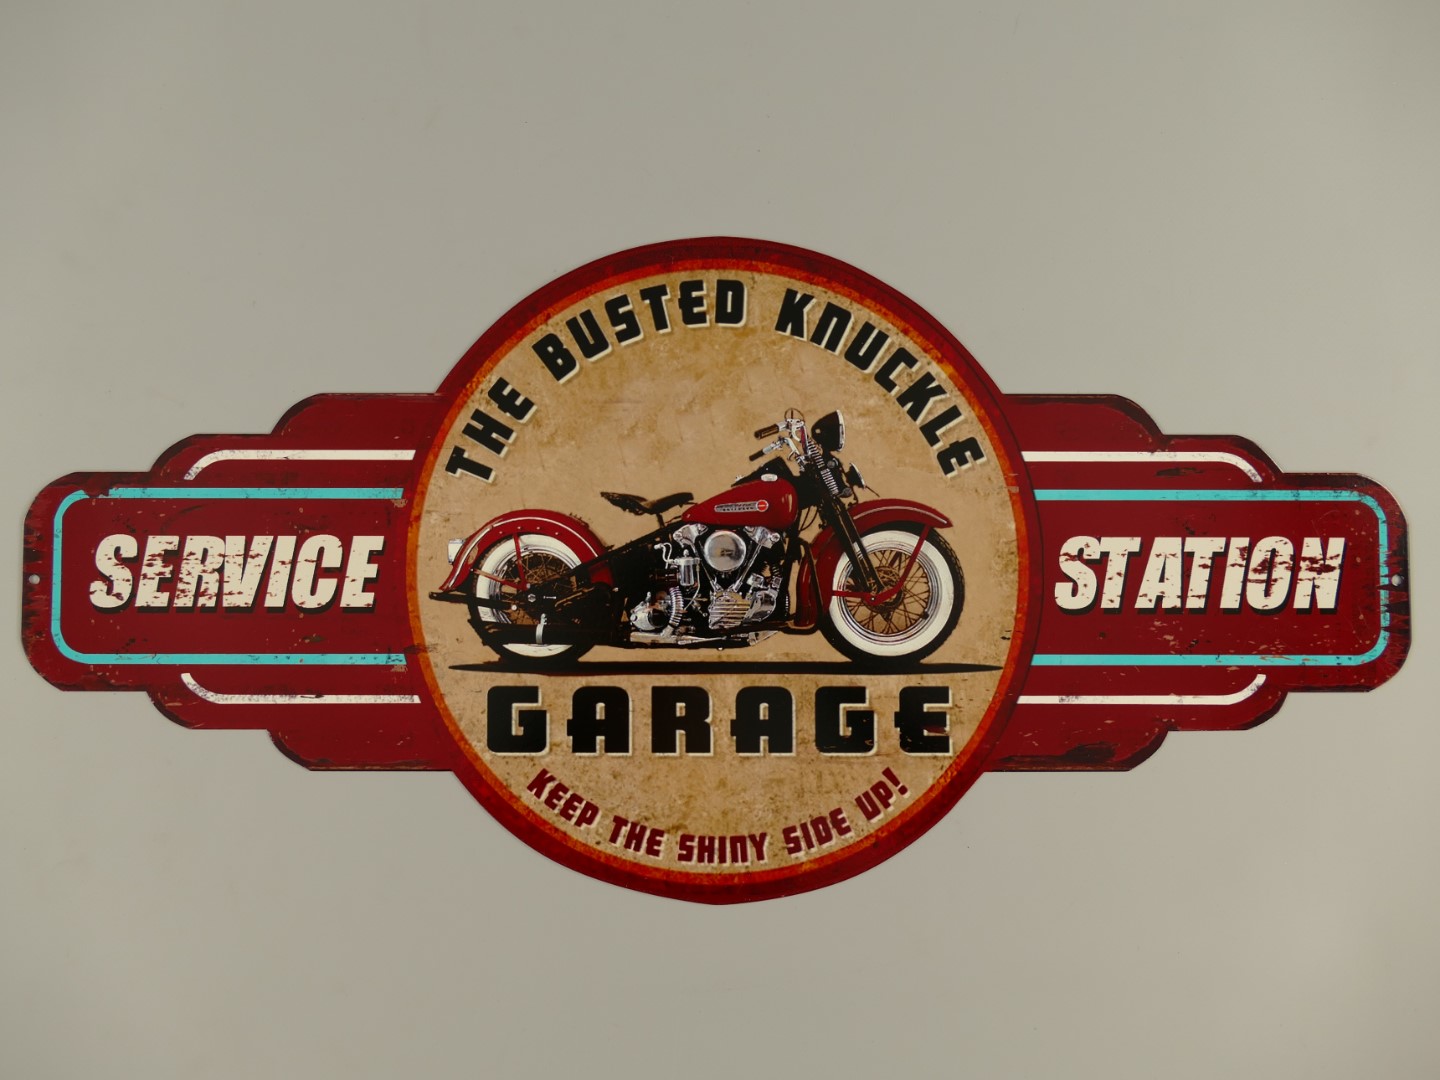 Busted Knuckle Service Station  - 60 x 28 cm